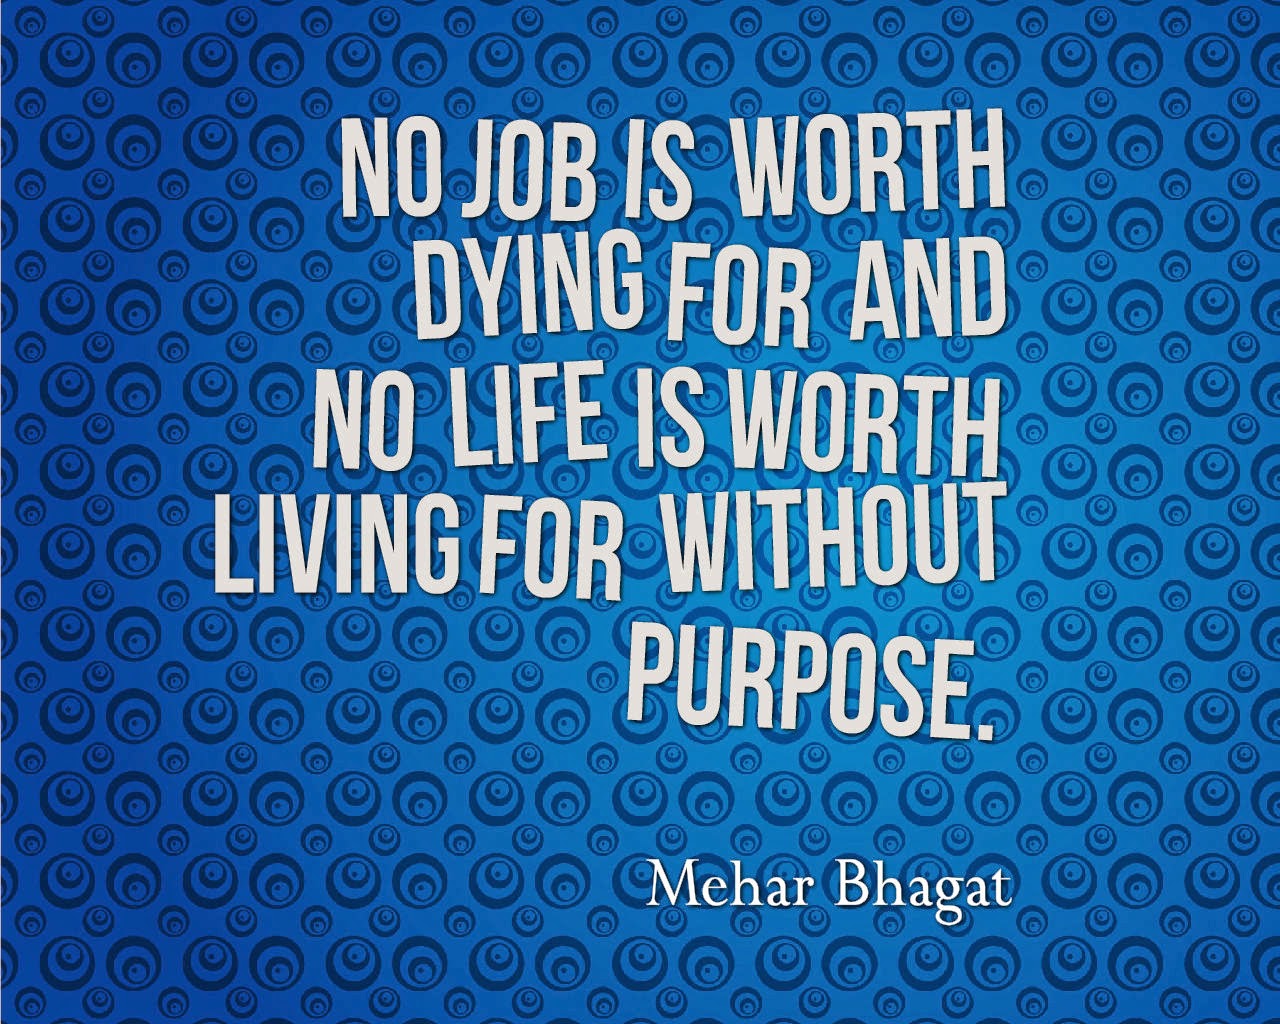 No job is worth dying for and no life is worth living for without purpose